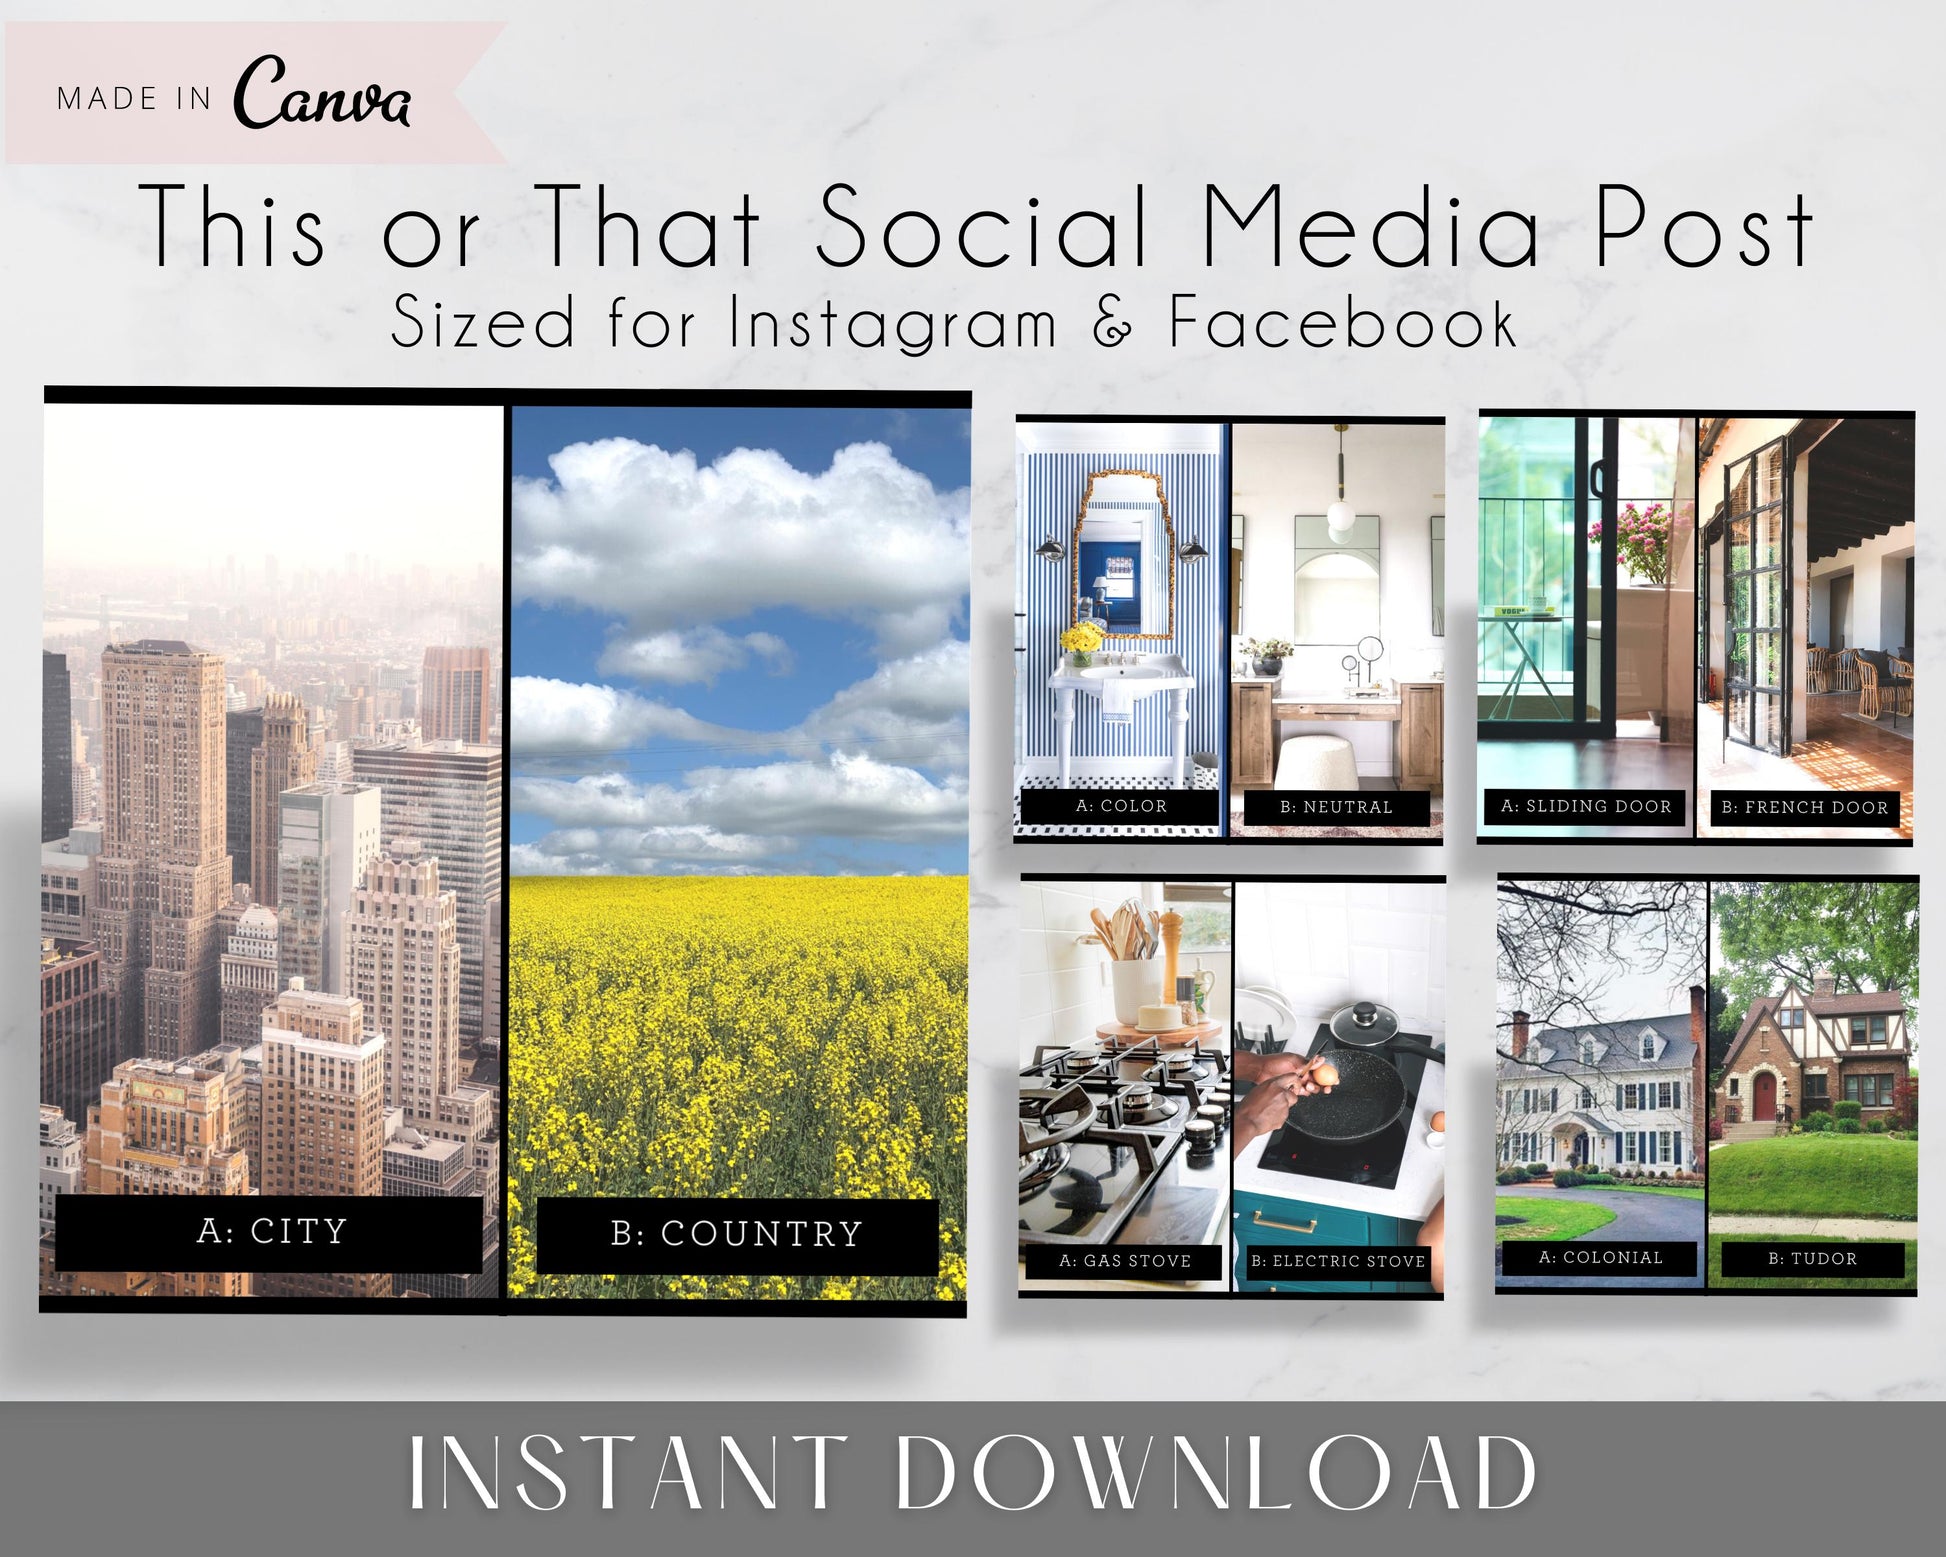 Real Estate This or That Social Media Posts for Realtors, Agents to use on Facebook or Instagram - Instant Download - Made in Canva